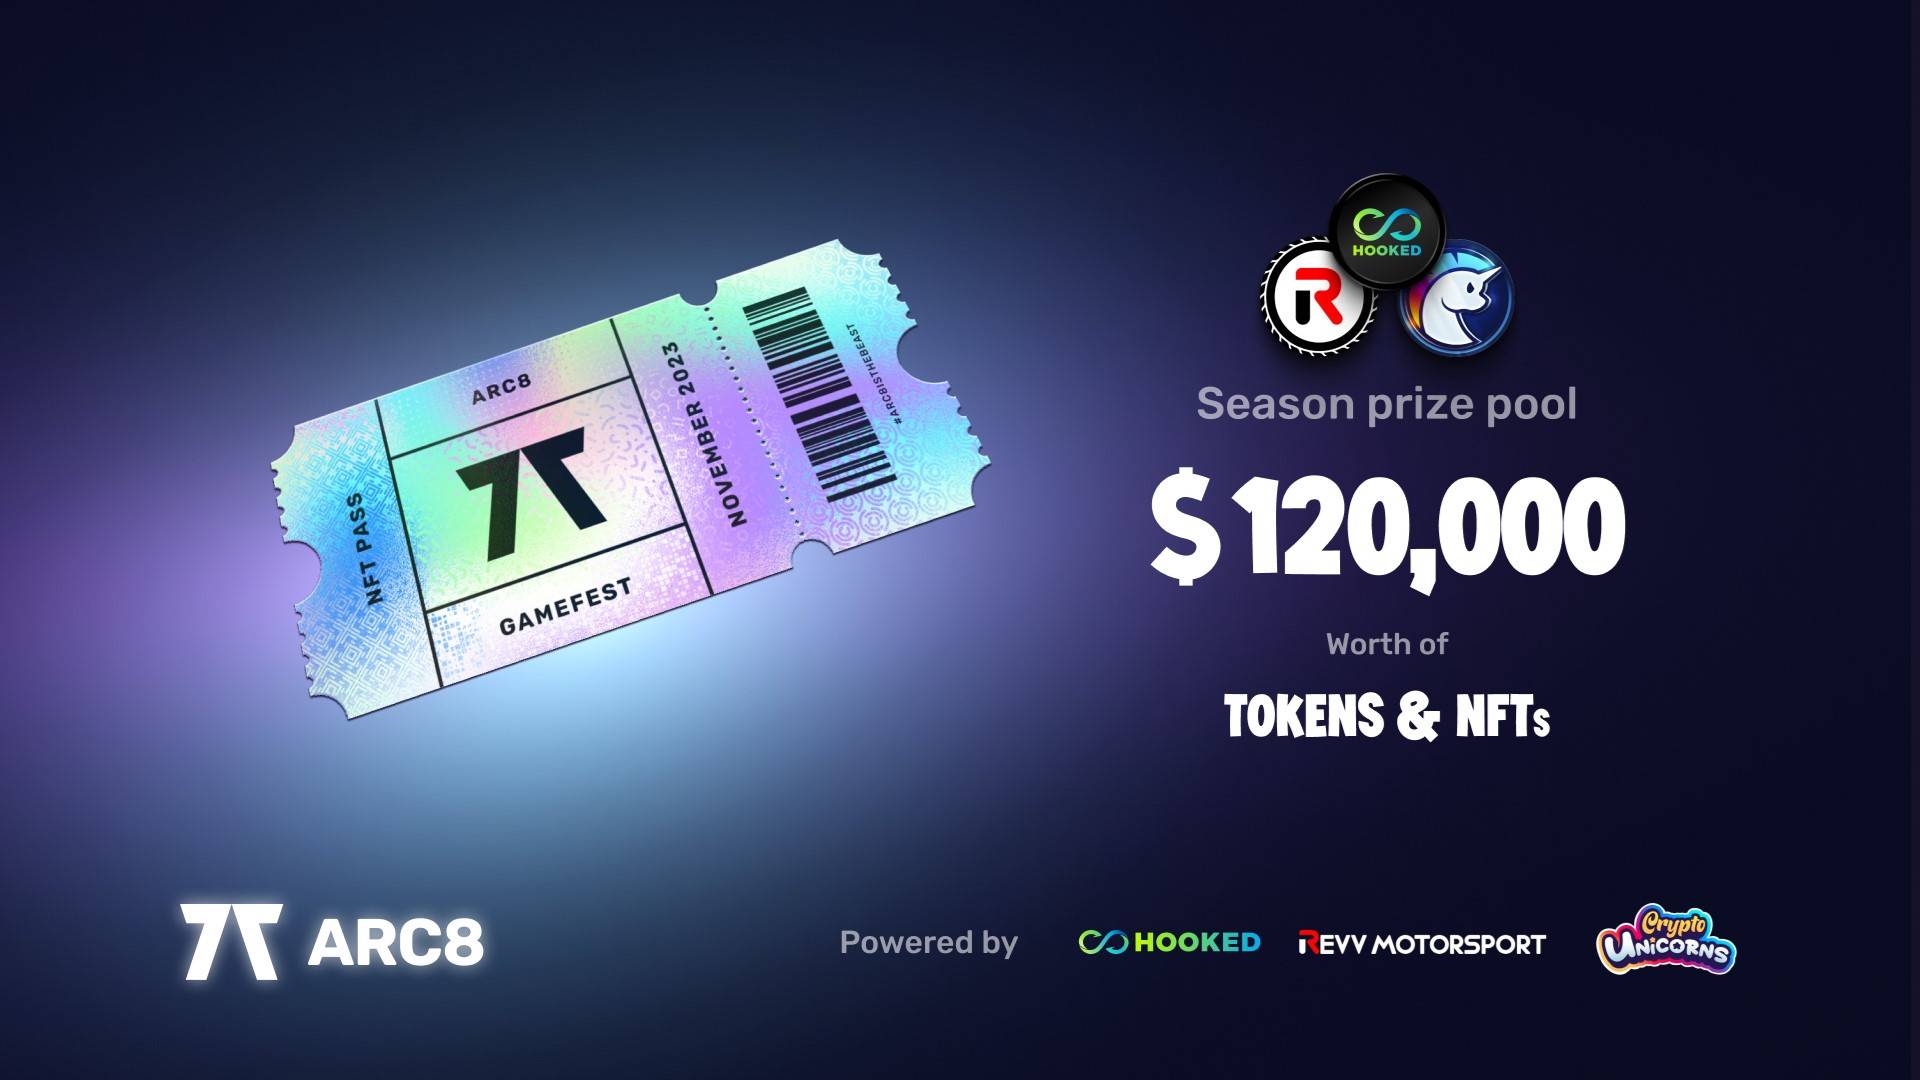 Arc8 Unleashes GameFest Extravaganza with $120,000 Prize Pool and Exclusive NFTs